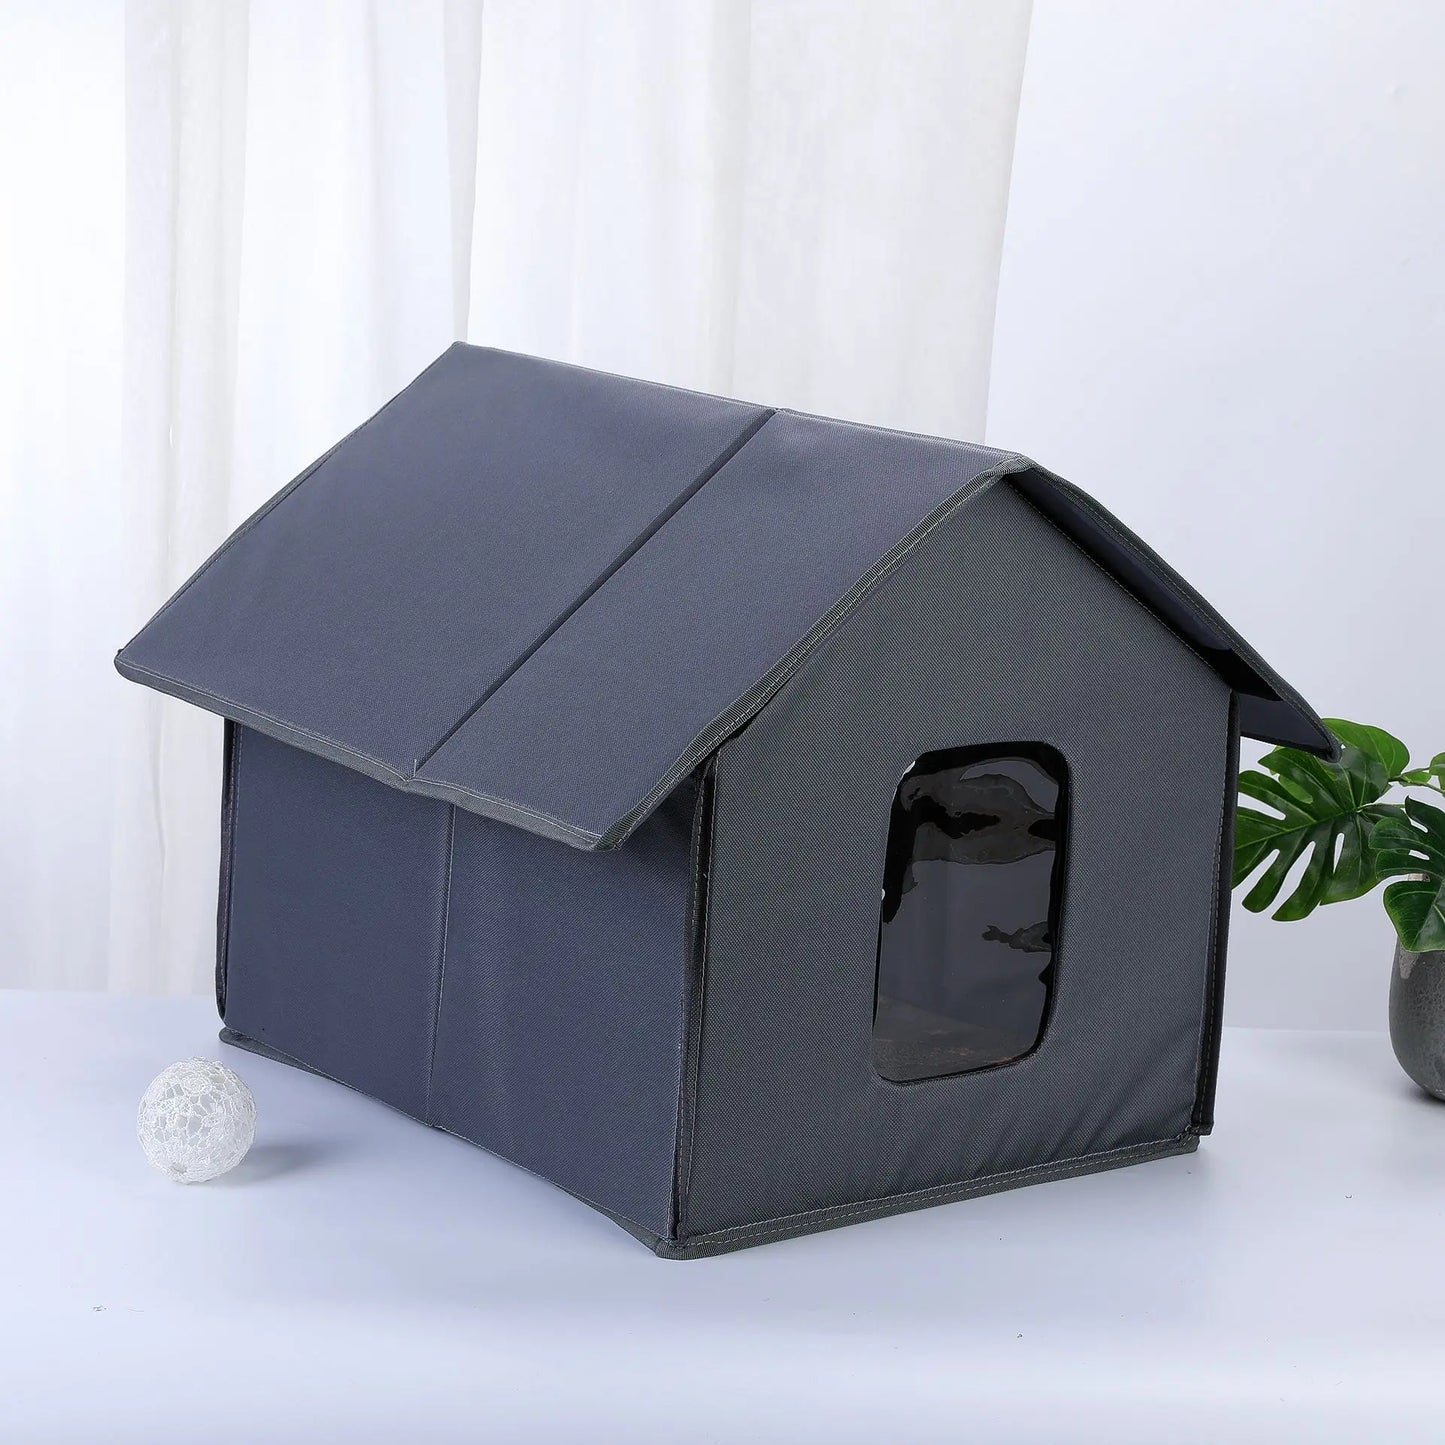 Waterproof Outdoor Stray Cat Nest - Foldable Pet House#CatHouse,#CatPlayground,#CatsAccessories,#DogOuterwear,#DurableCatPlayhouse,#DurablePetHouse,#FoldableDogHouse,#OutdoorGear,#outdoorhouse,#OutdoorPetCare,#OutdoorPetComfort,#OutdoorPetGear,#OutdoorPet